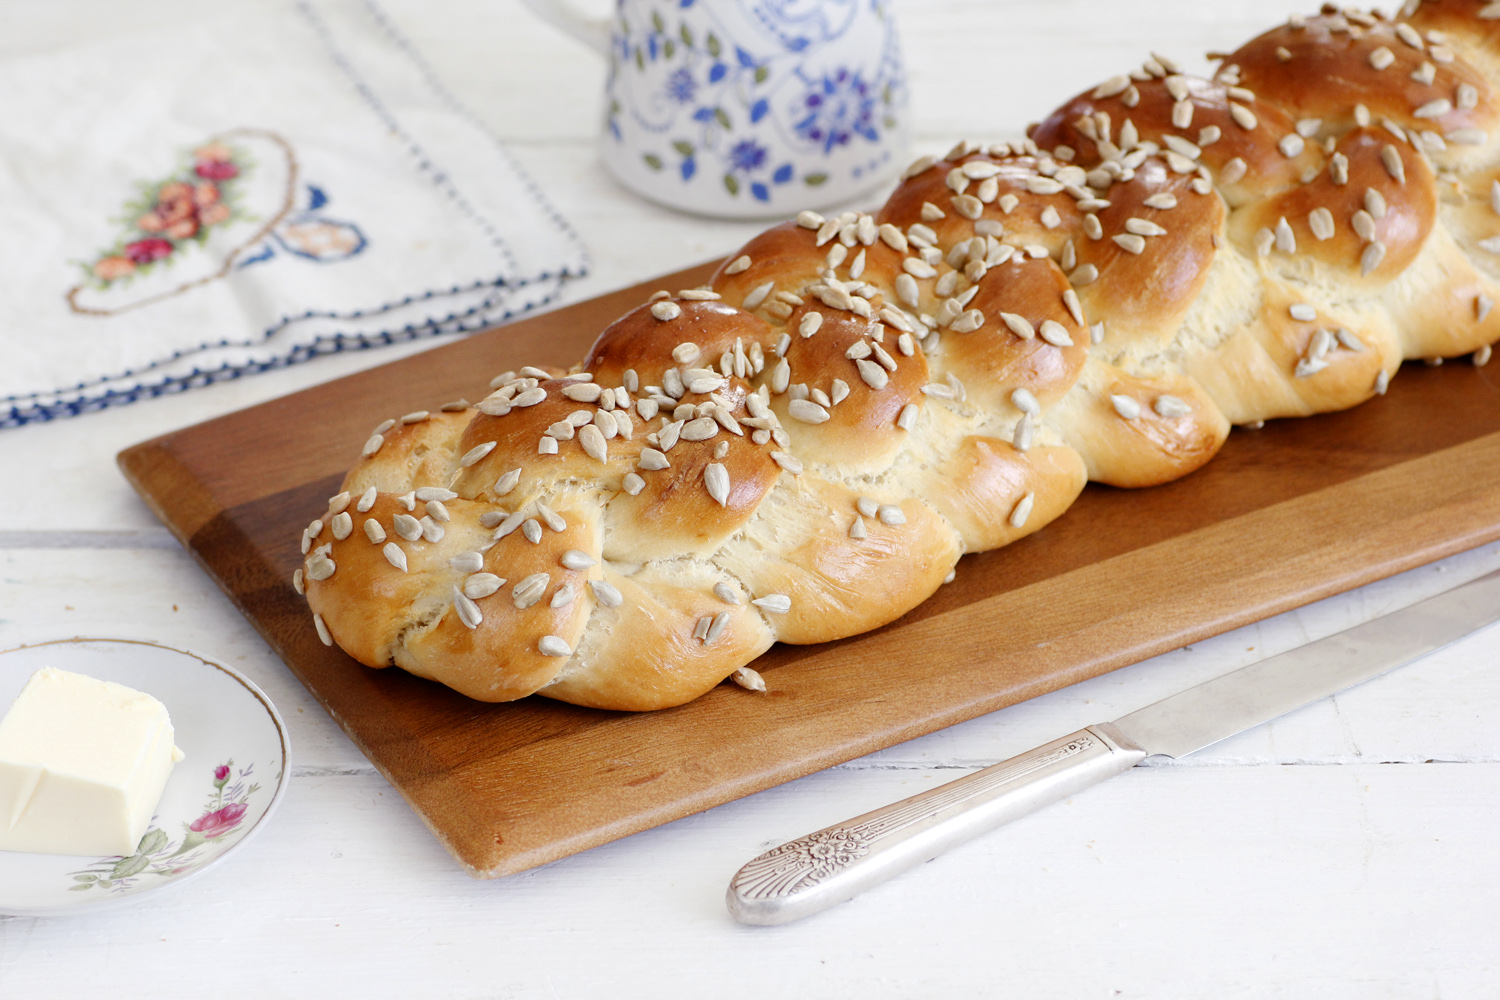 🥖 How Many Baked Goods Have You Tried from Around the World? Challah